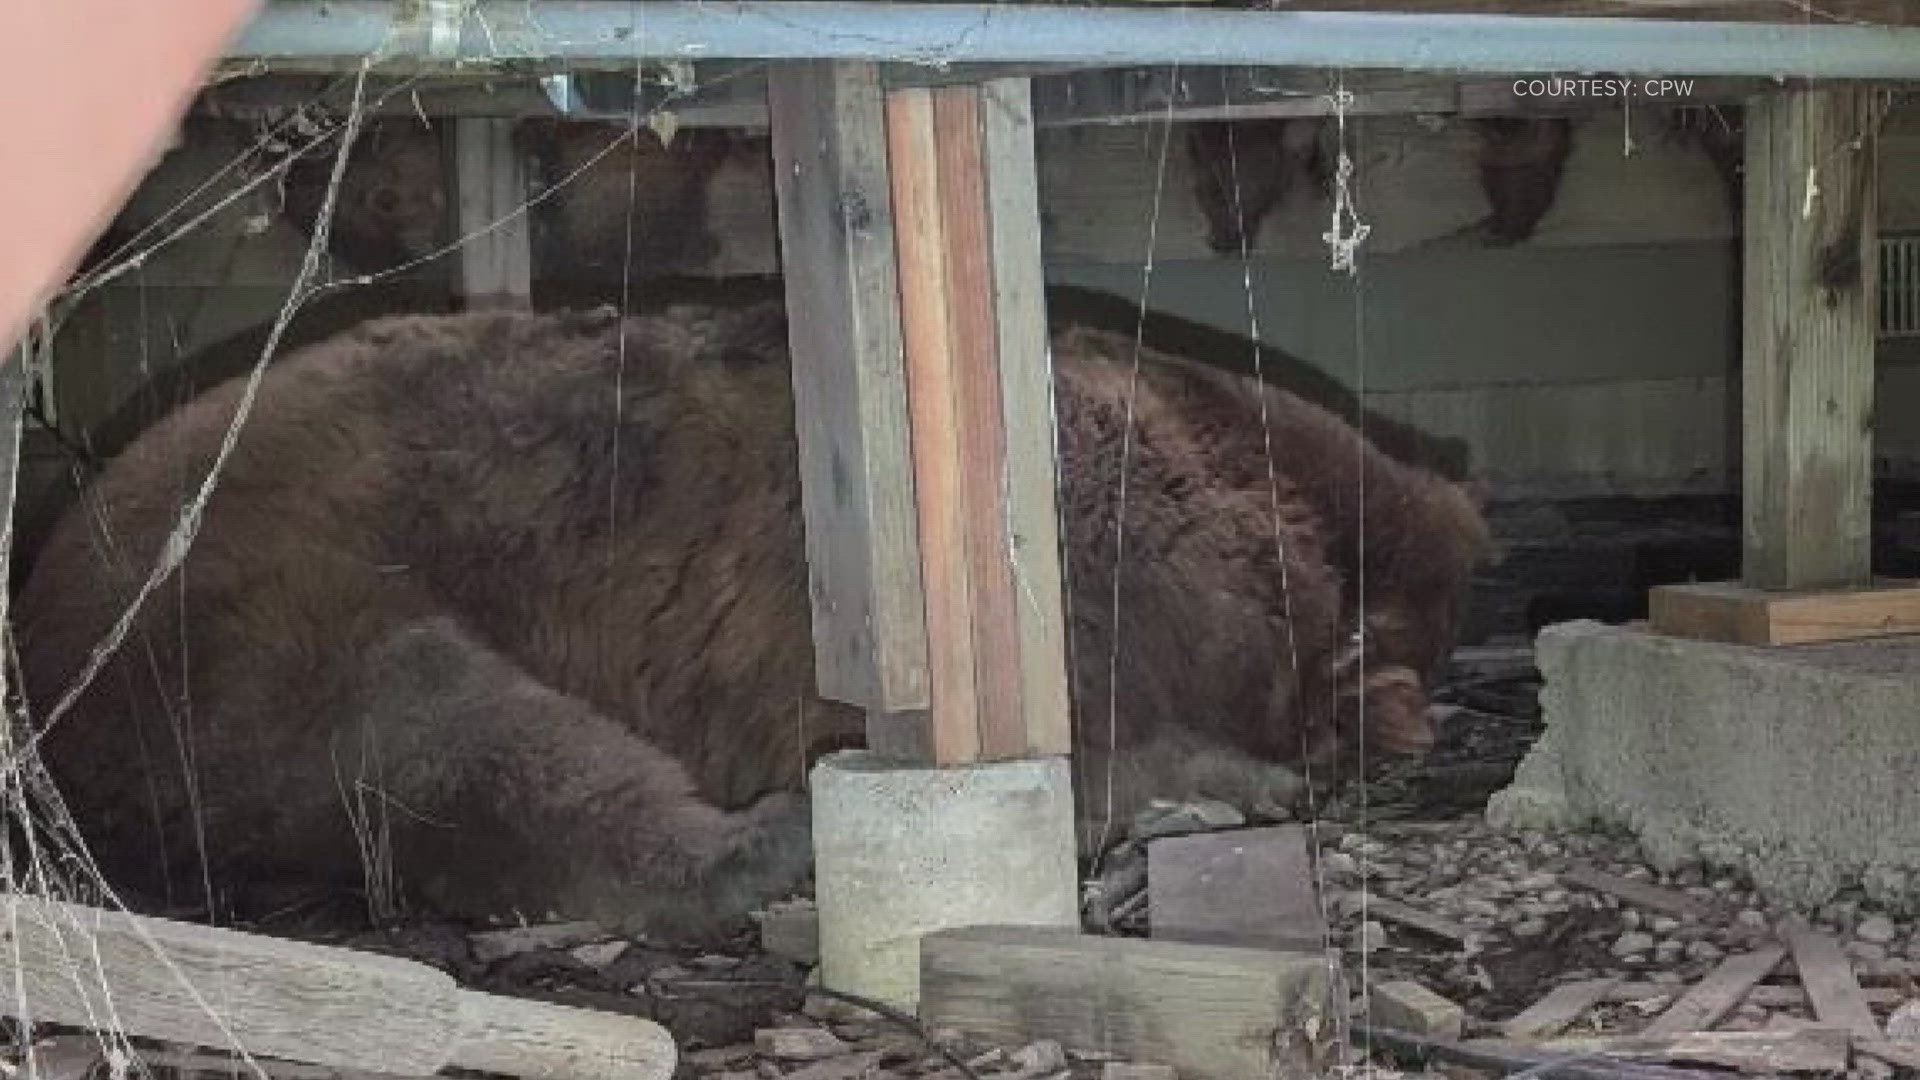 A Pagosa Springs family got a surprise below their back deck last week.